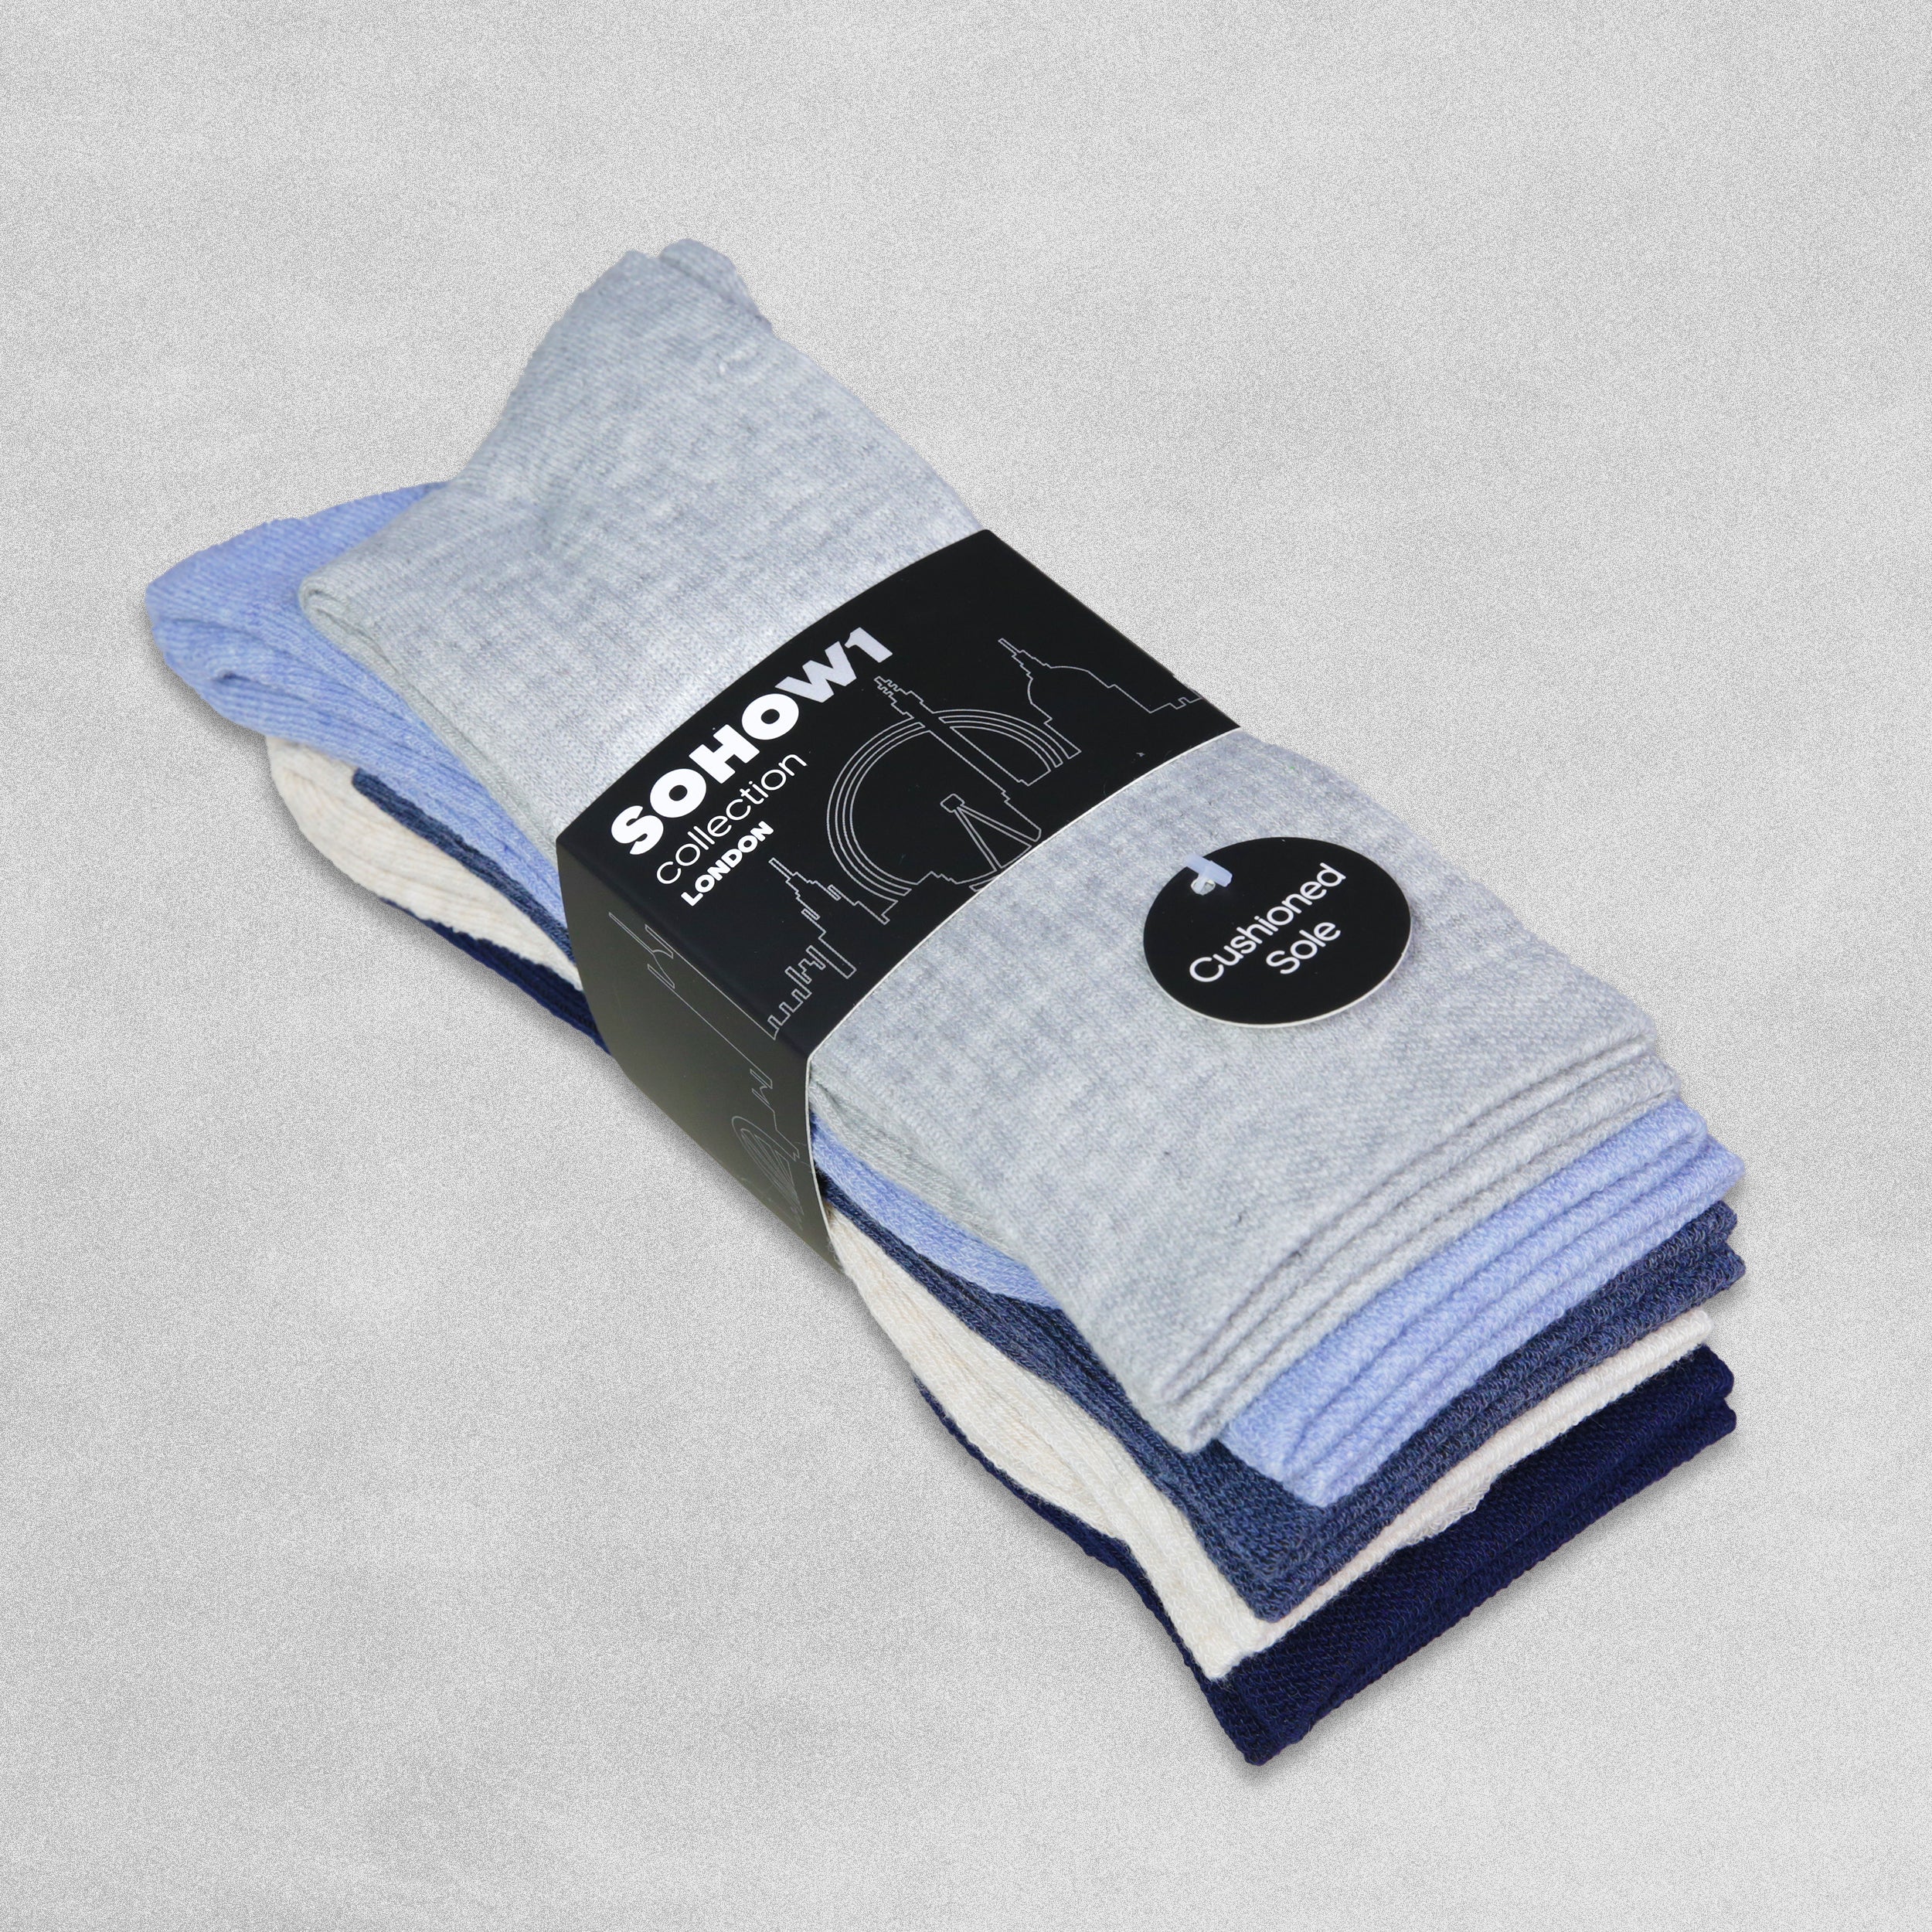 SOHOW1 - Mens Crew Socks Assorted Colours Size 41-46 (UK 7-11) - 5 Pairs